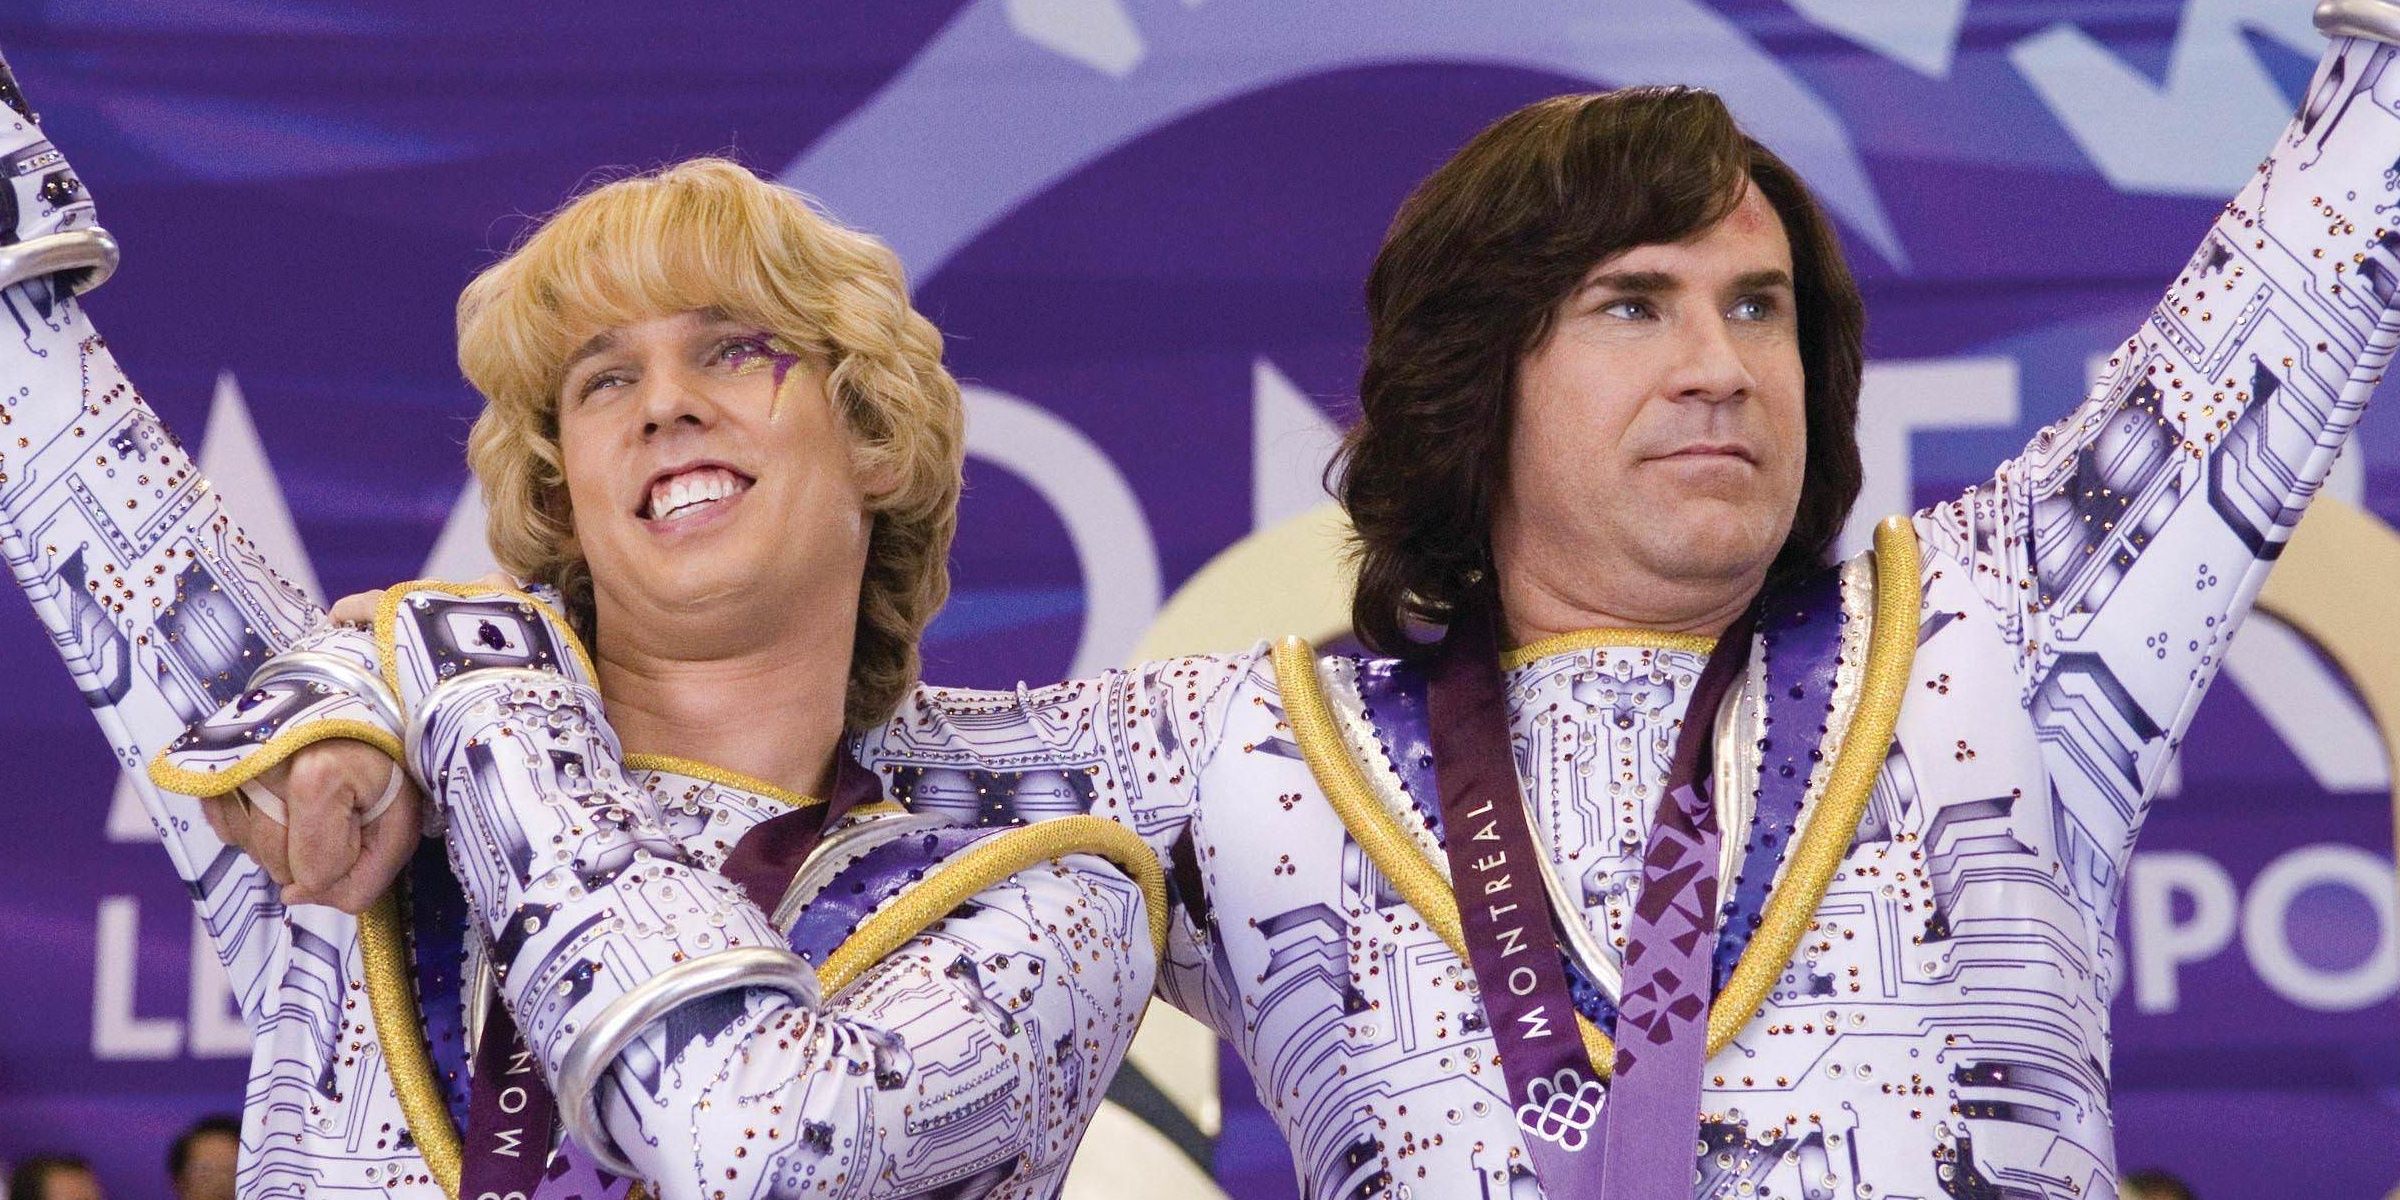 10 Movies To Watch If You Like Blades Of Glory